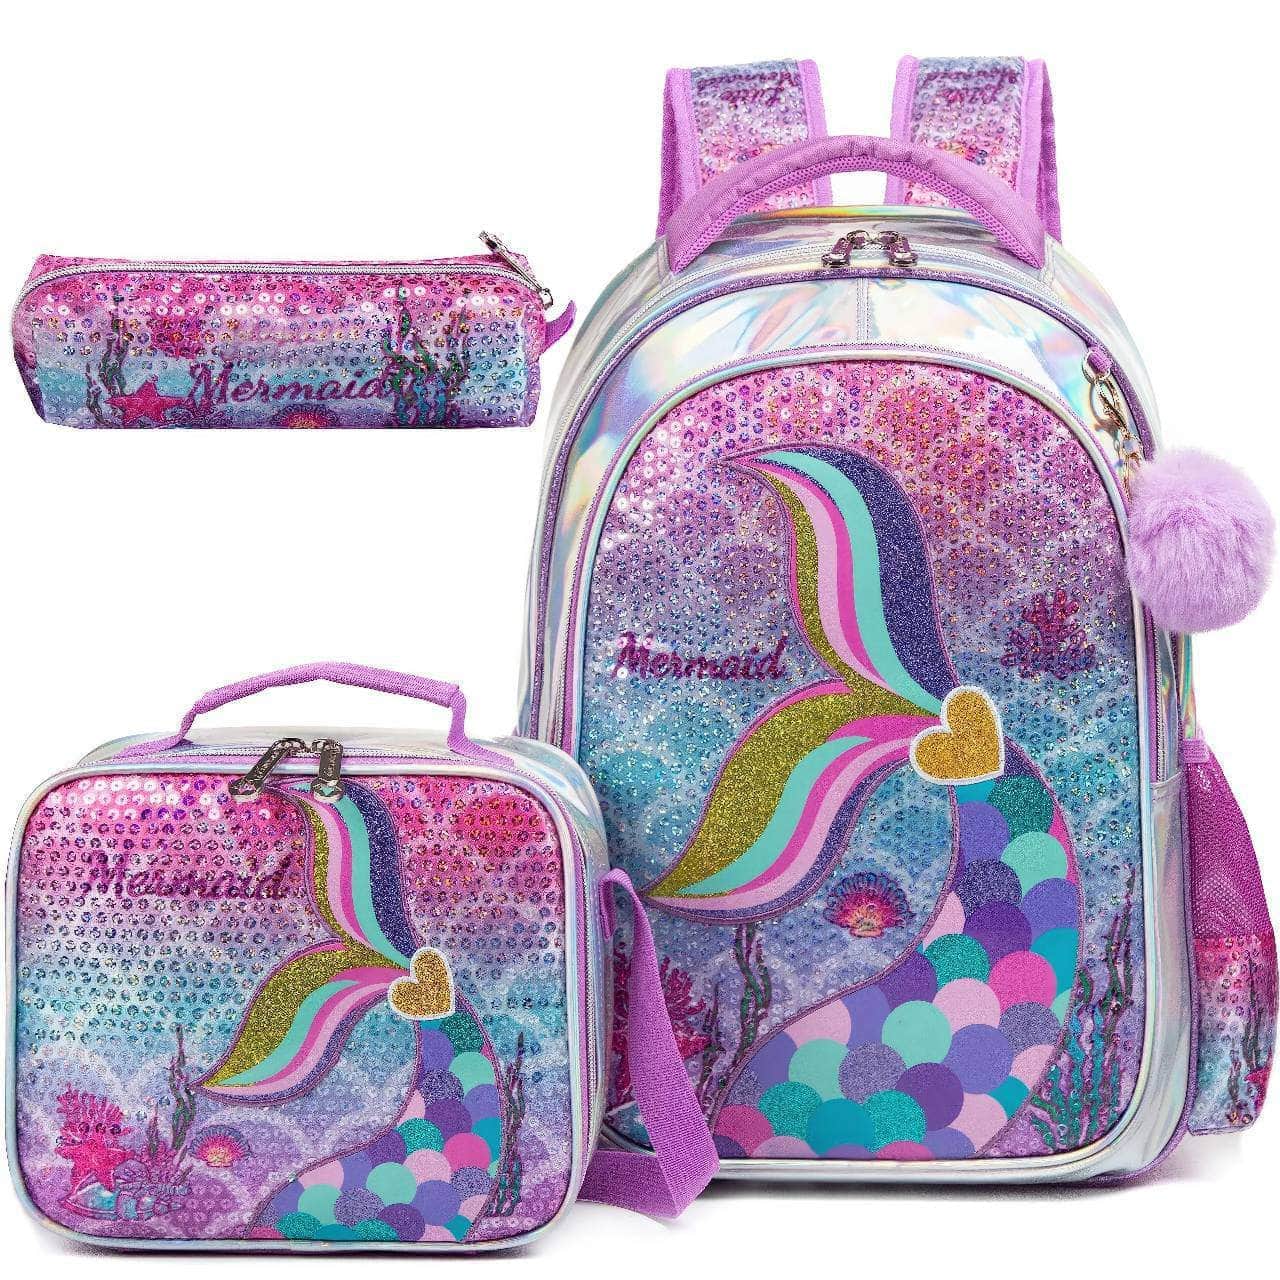 Meetbelify Mermaid Backpack Set for Girls - School Bag with Lunch Box, Ideal for Elementary Students (Ages 5-8) Lavender